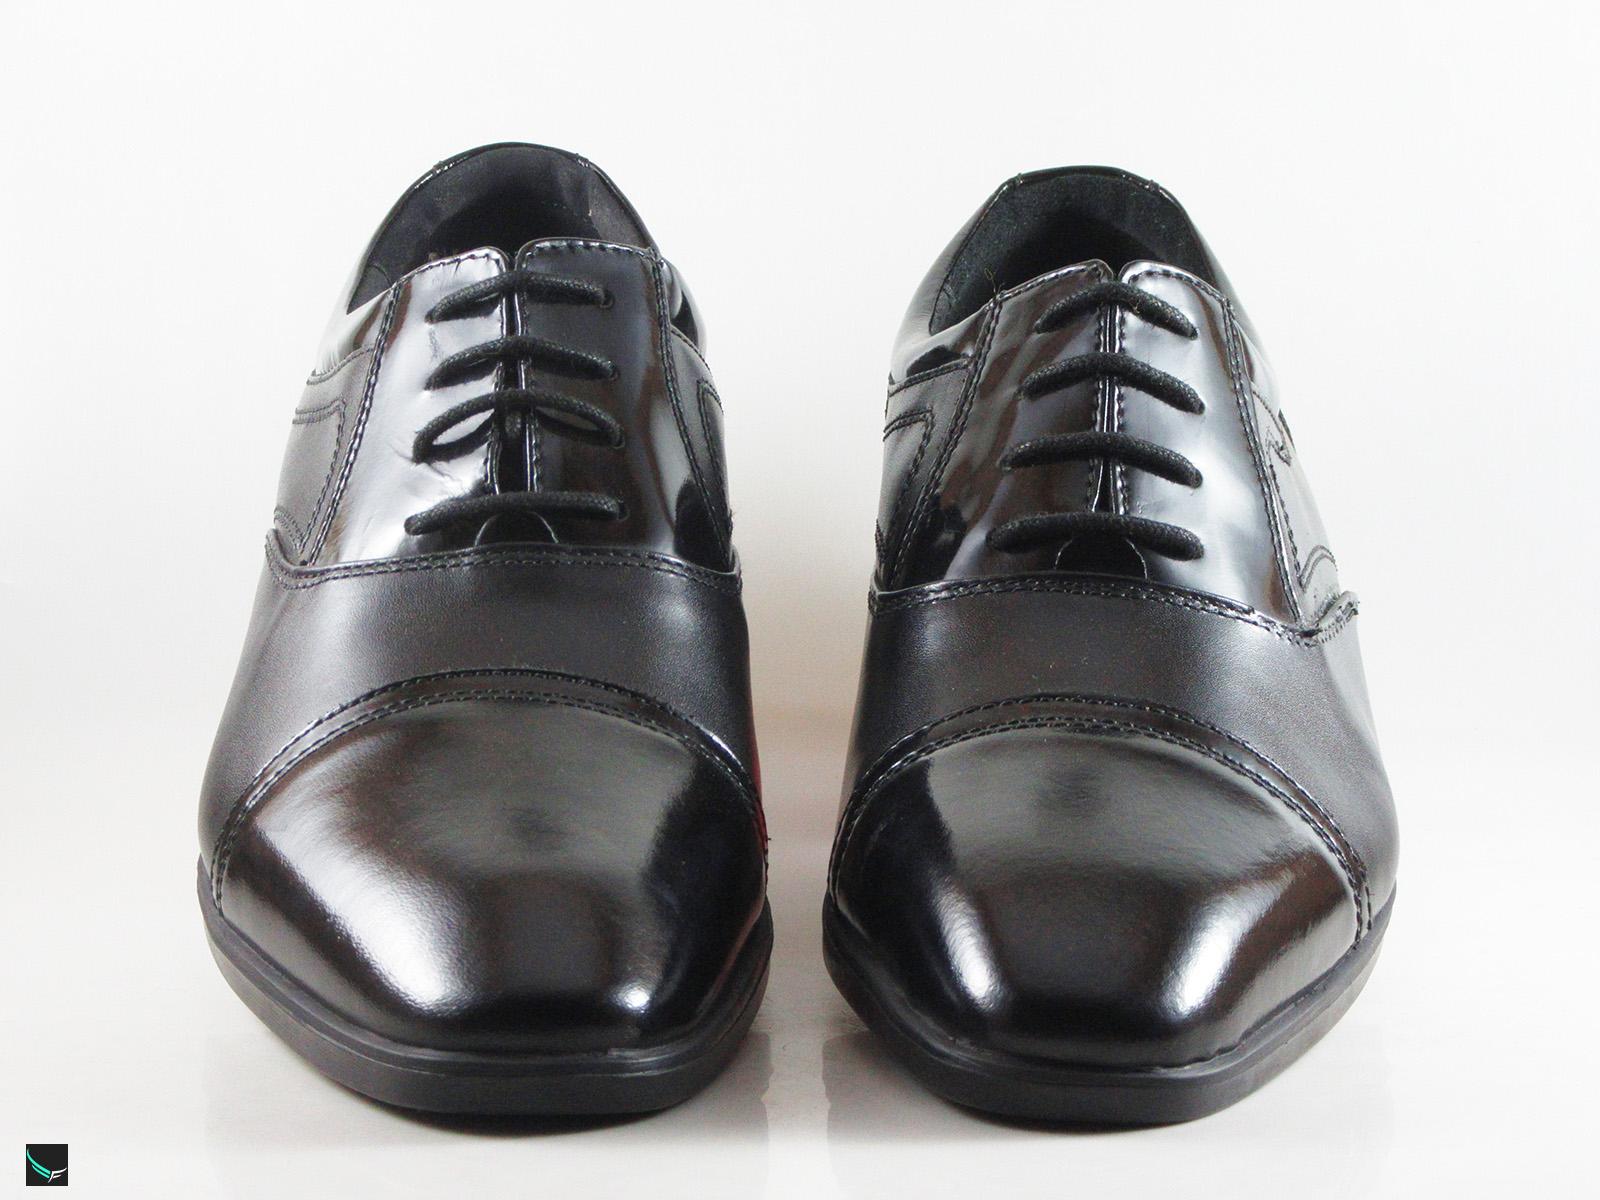 Foil Leather Black Formal Shoes - 4262 - Leather Collections On ...